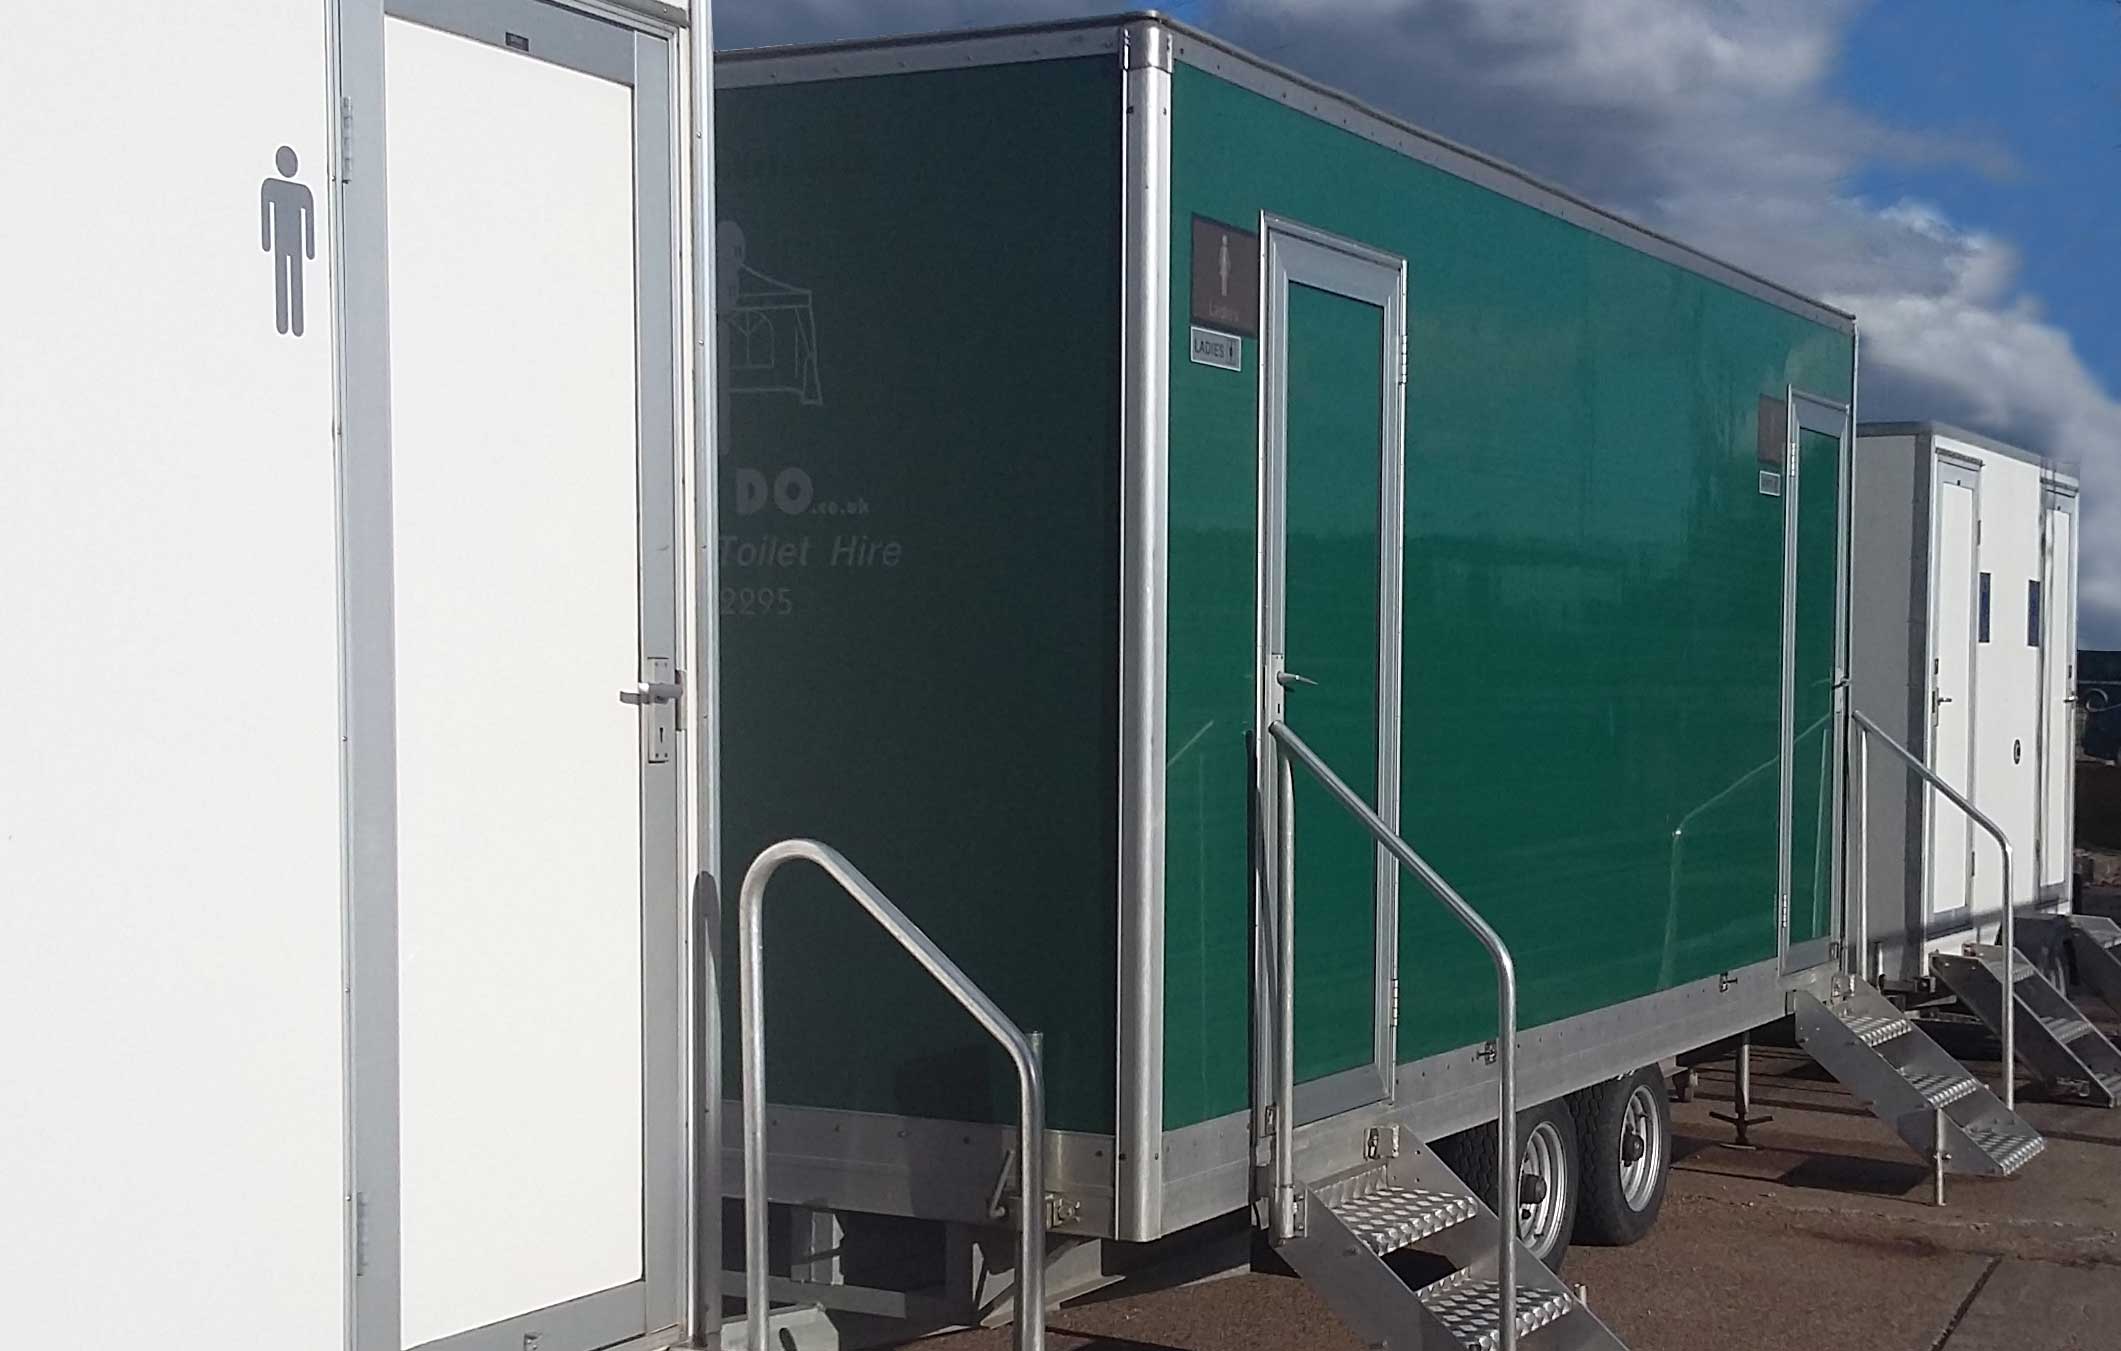 Hire luxury portable toilet trailers for your special event